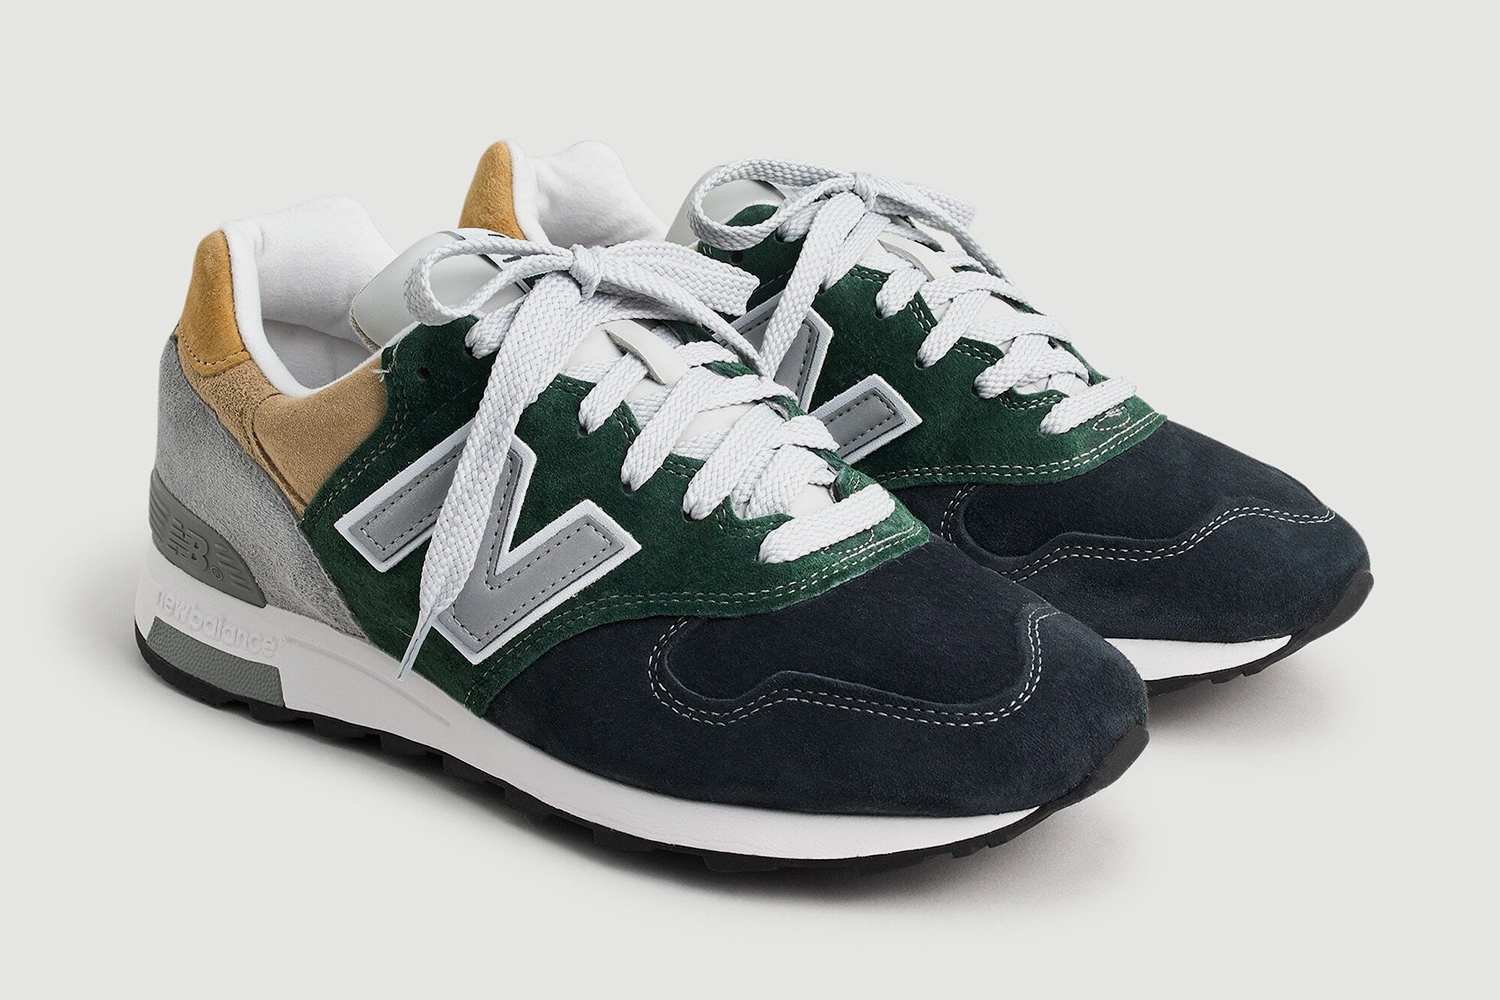 J.Crew and New Balance Collab on New 1400 Sneaker - InsideHook